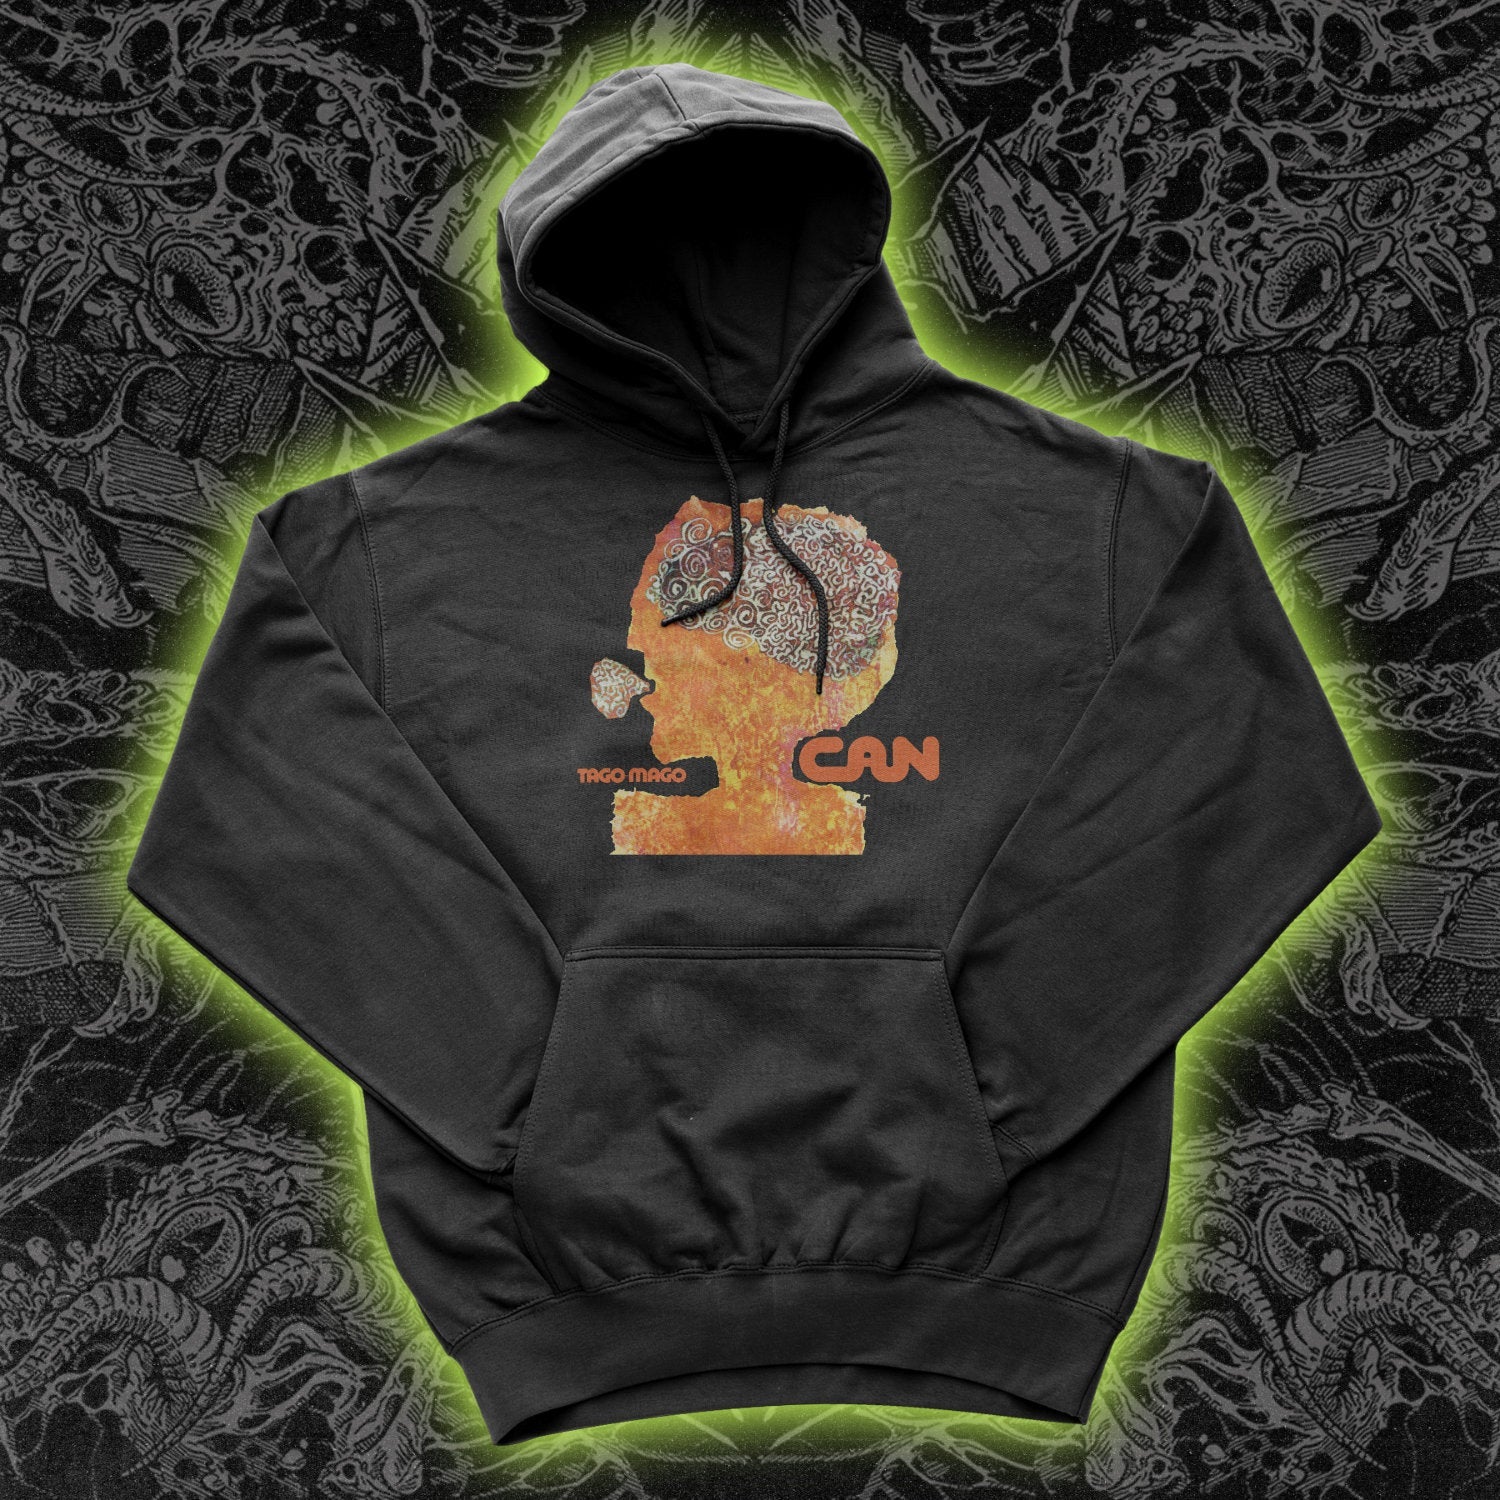 Can Tago Mago Hoodie